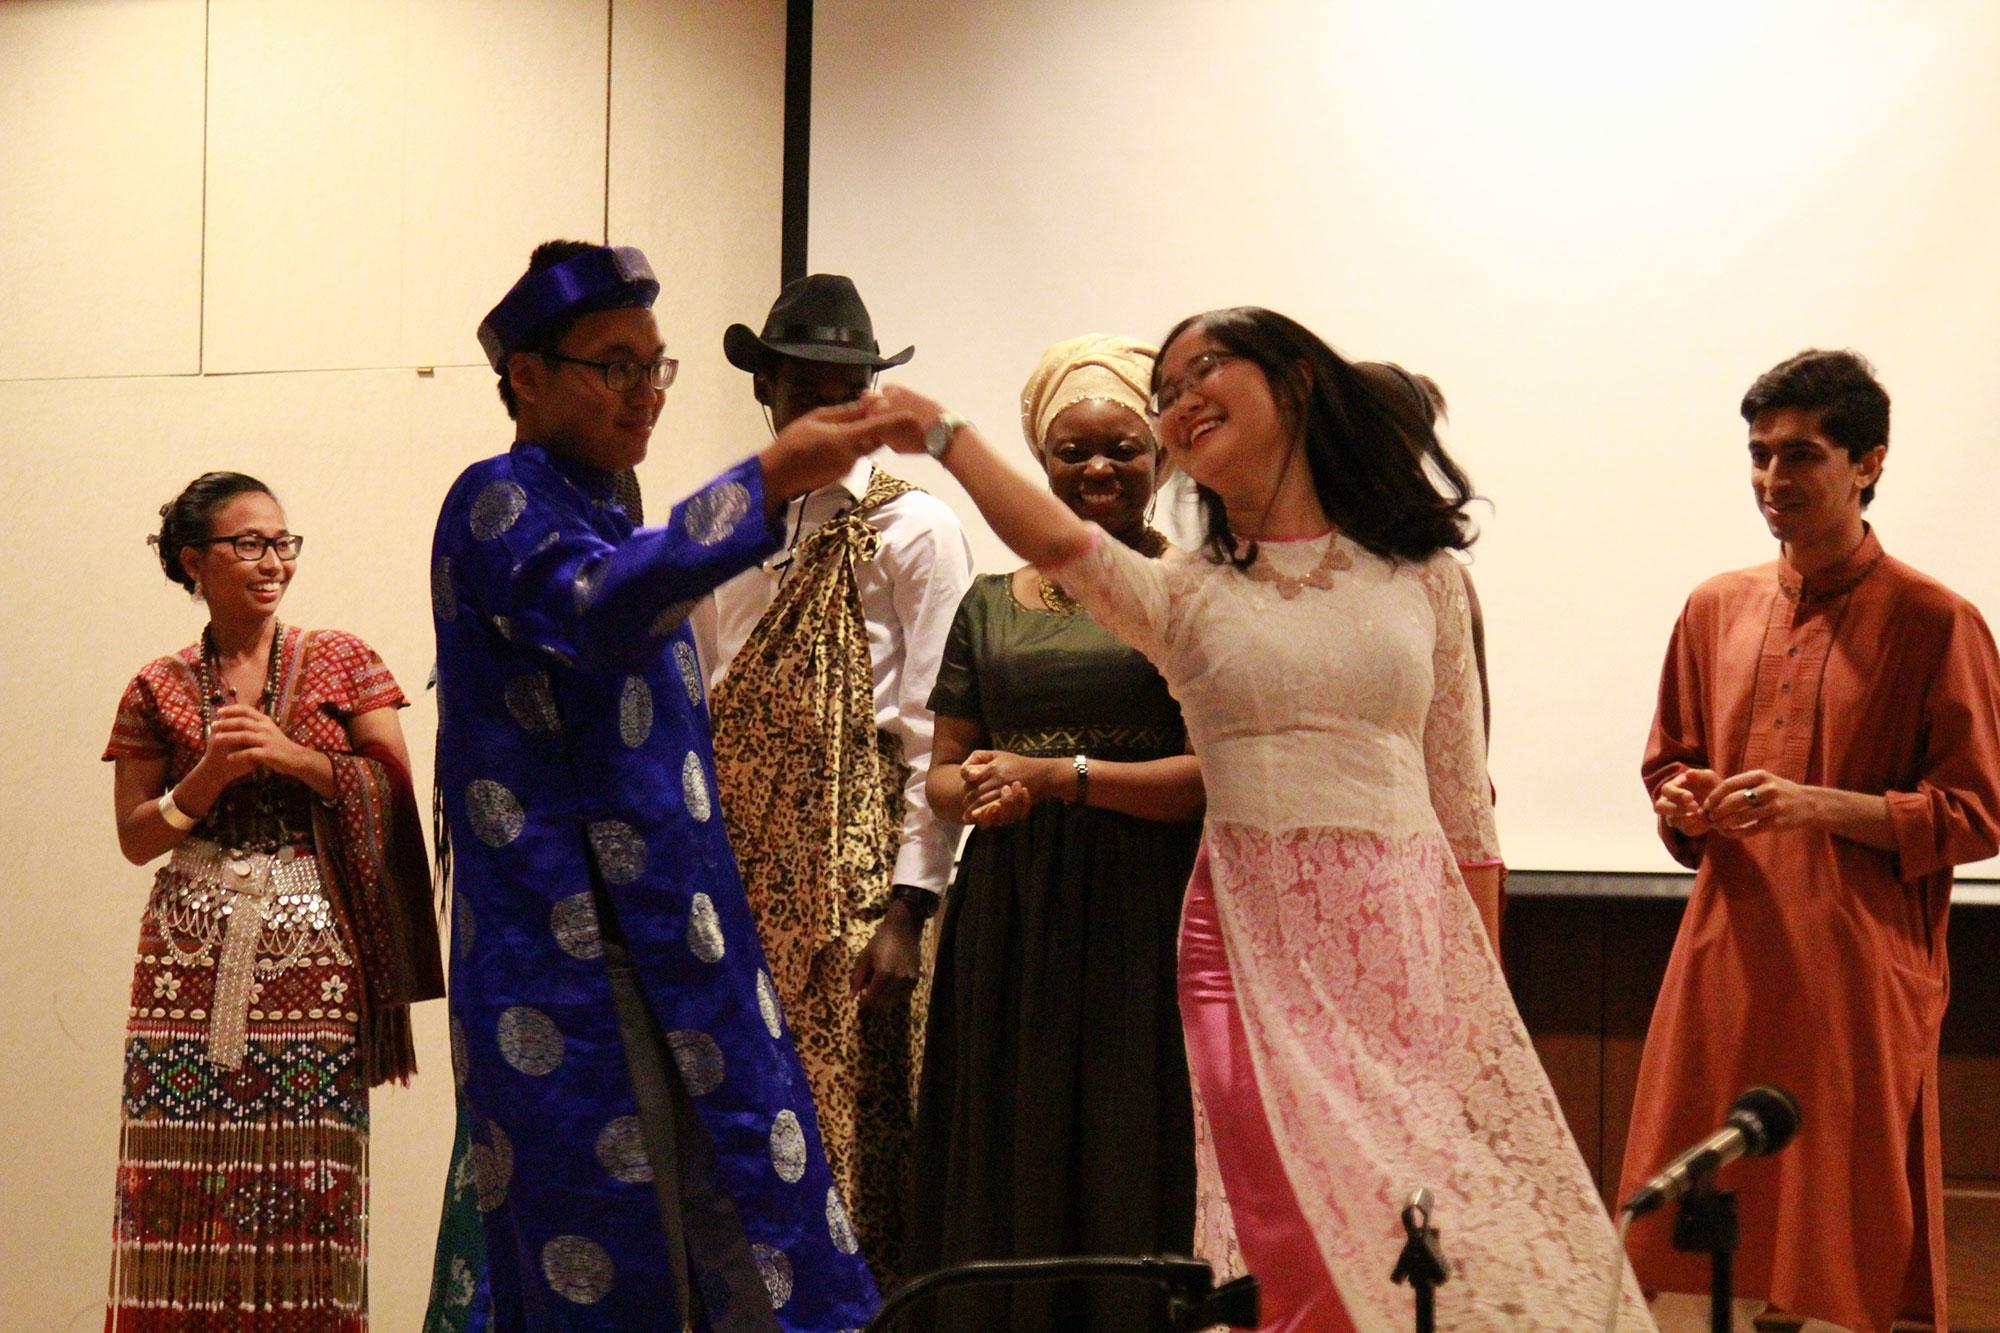 The+International+Spring+Banquet+brought+music+and+cultural+fashion+to+Fort+Worth.